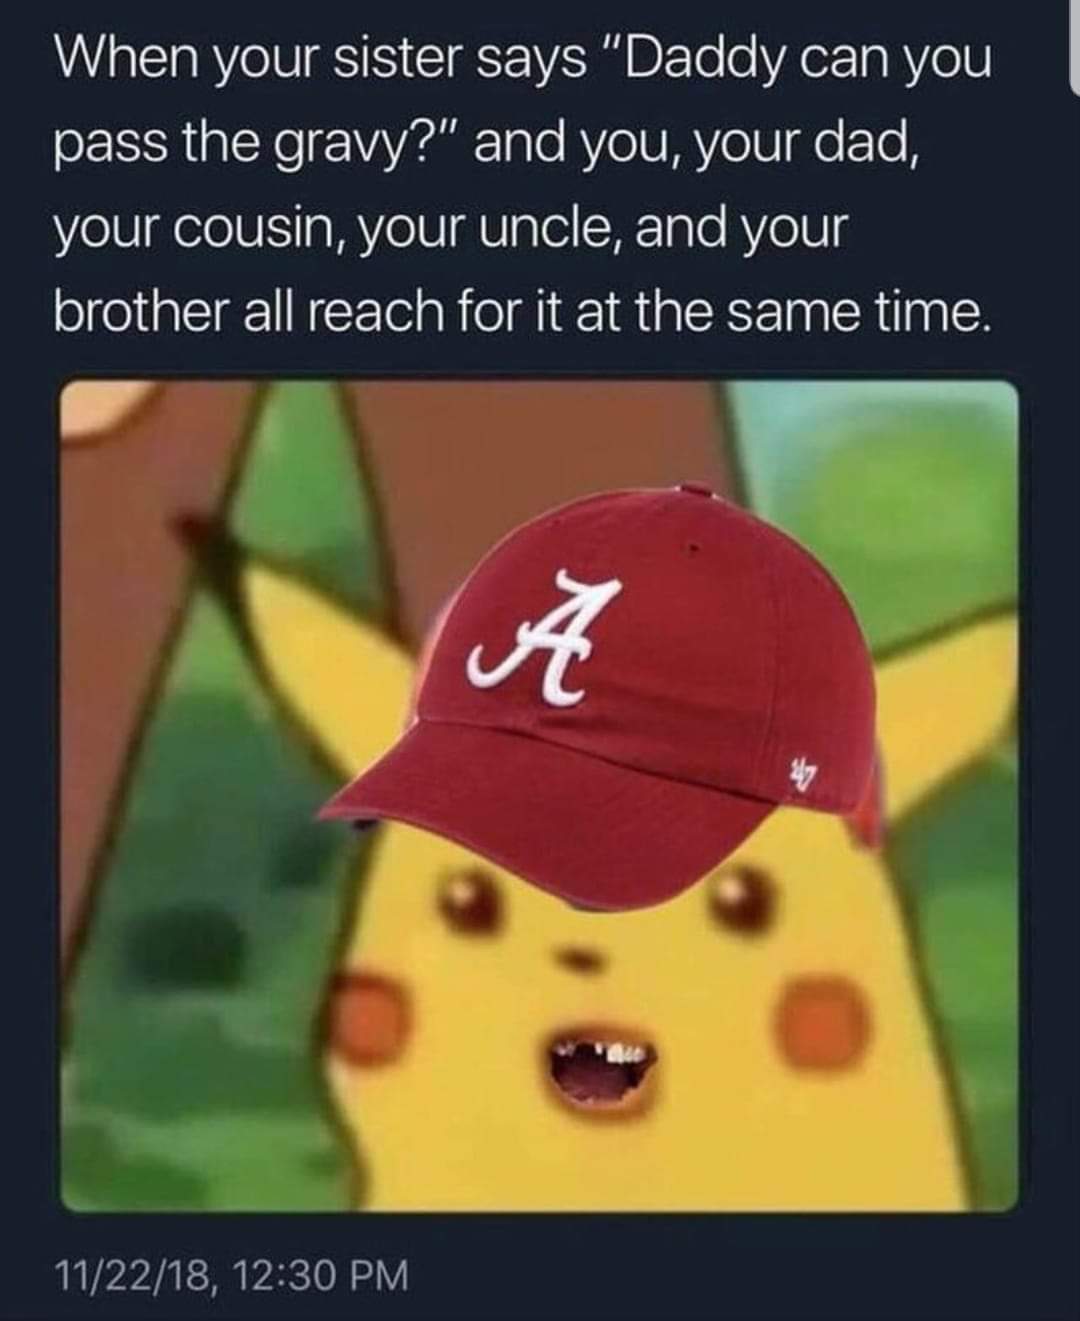 your sister says pass the gravy - When your sister says "Daddy can you pass the gravy?" and you, your dad, your cousin, your uncle, and your brother all reach for it at the same time. 112218,